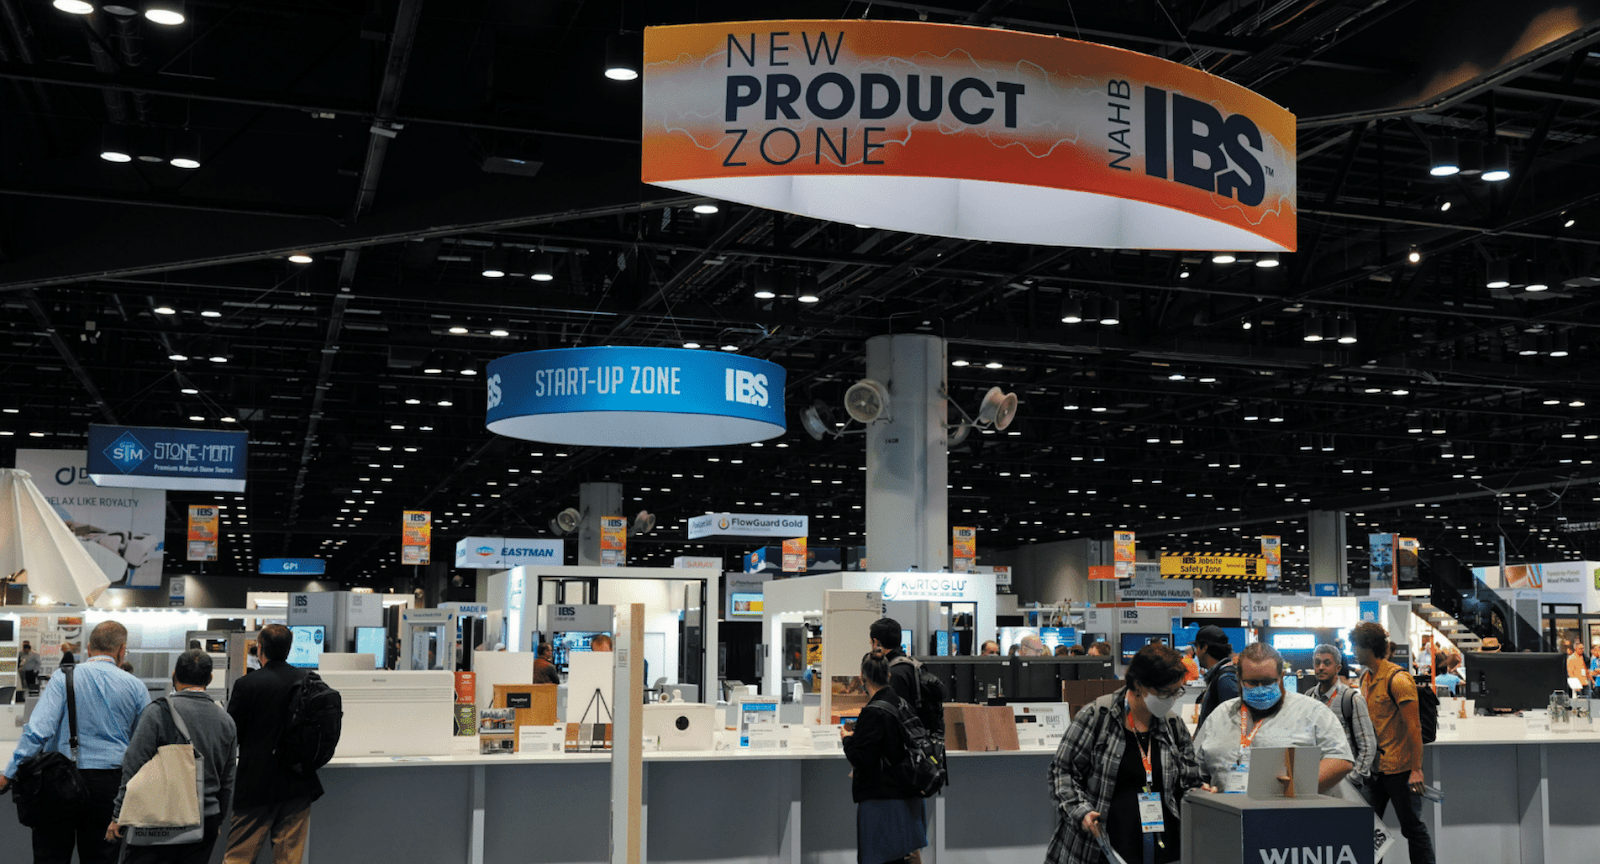 12 Home Storage & Organization Tips from the 2019 International Builders  Show - NewHomeSource